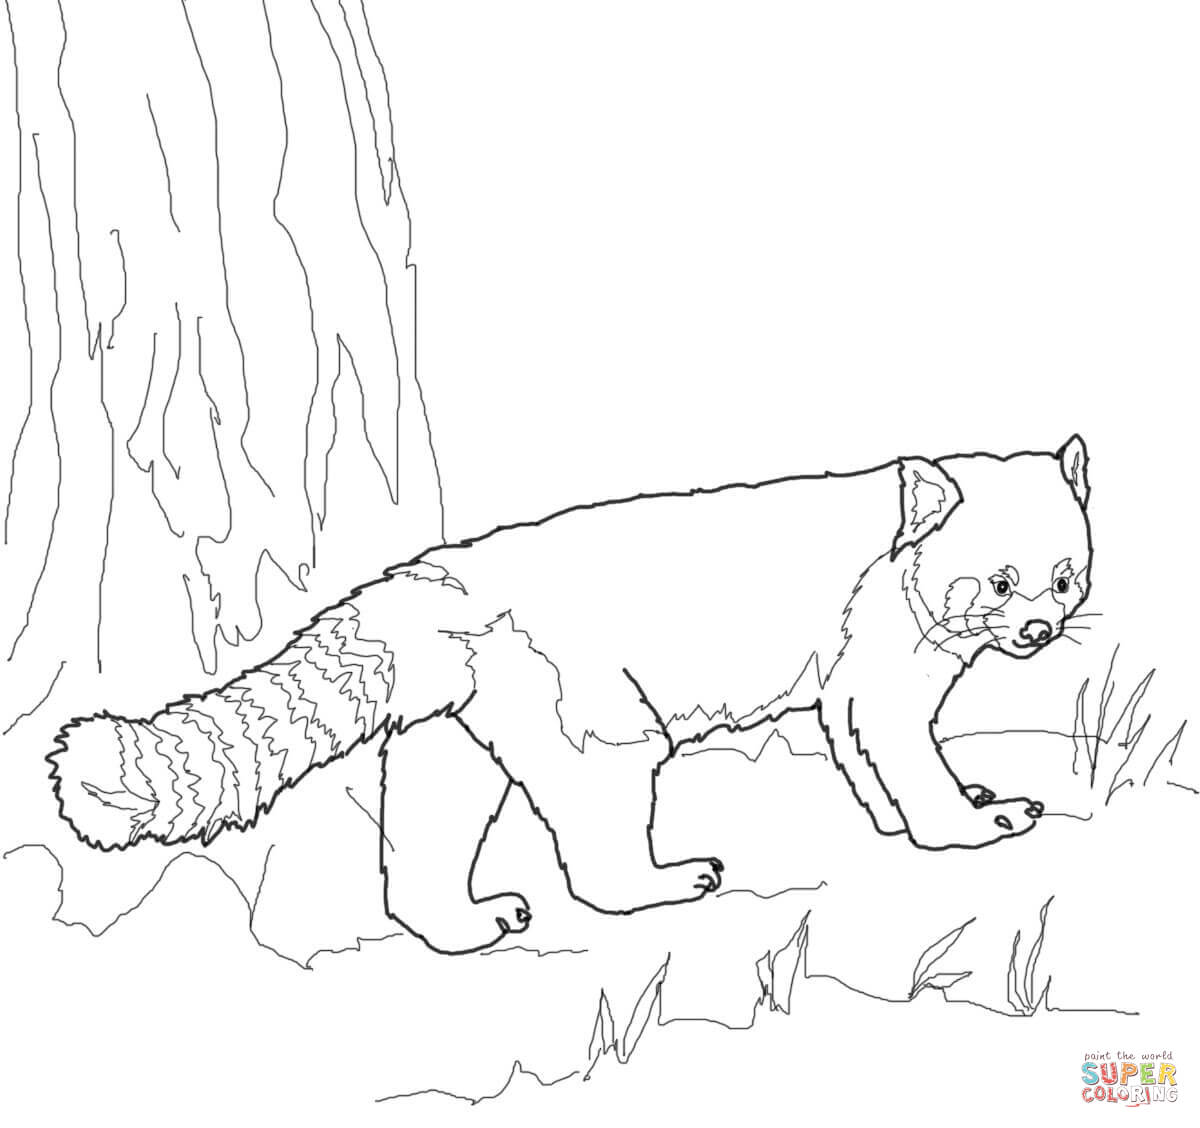 Red Panda coloring page | Free Printable Coloring Pages